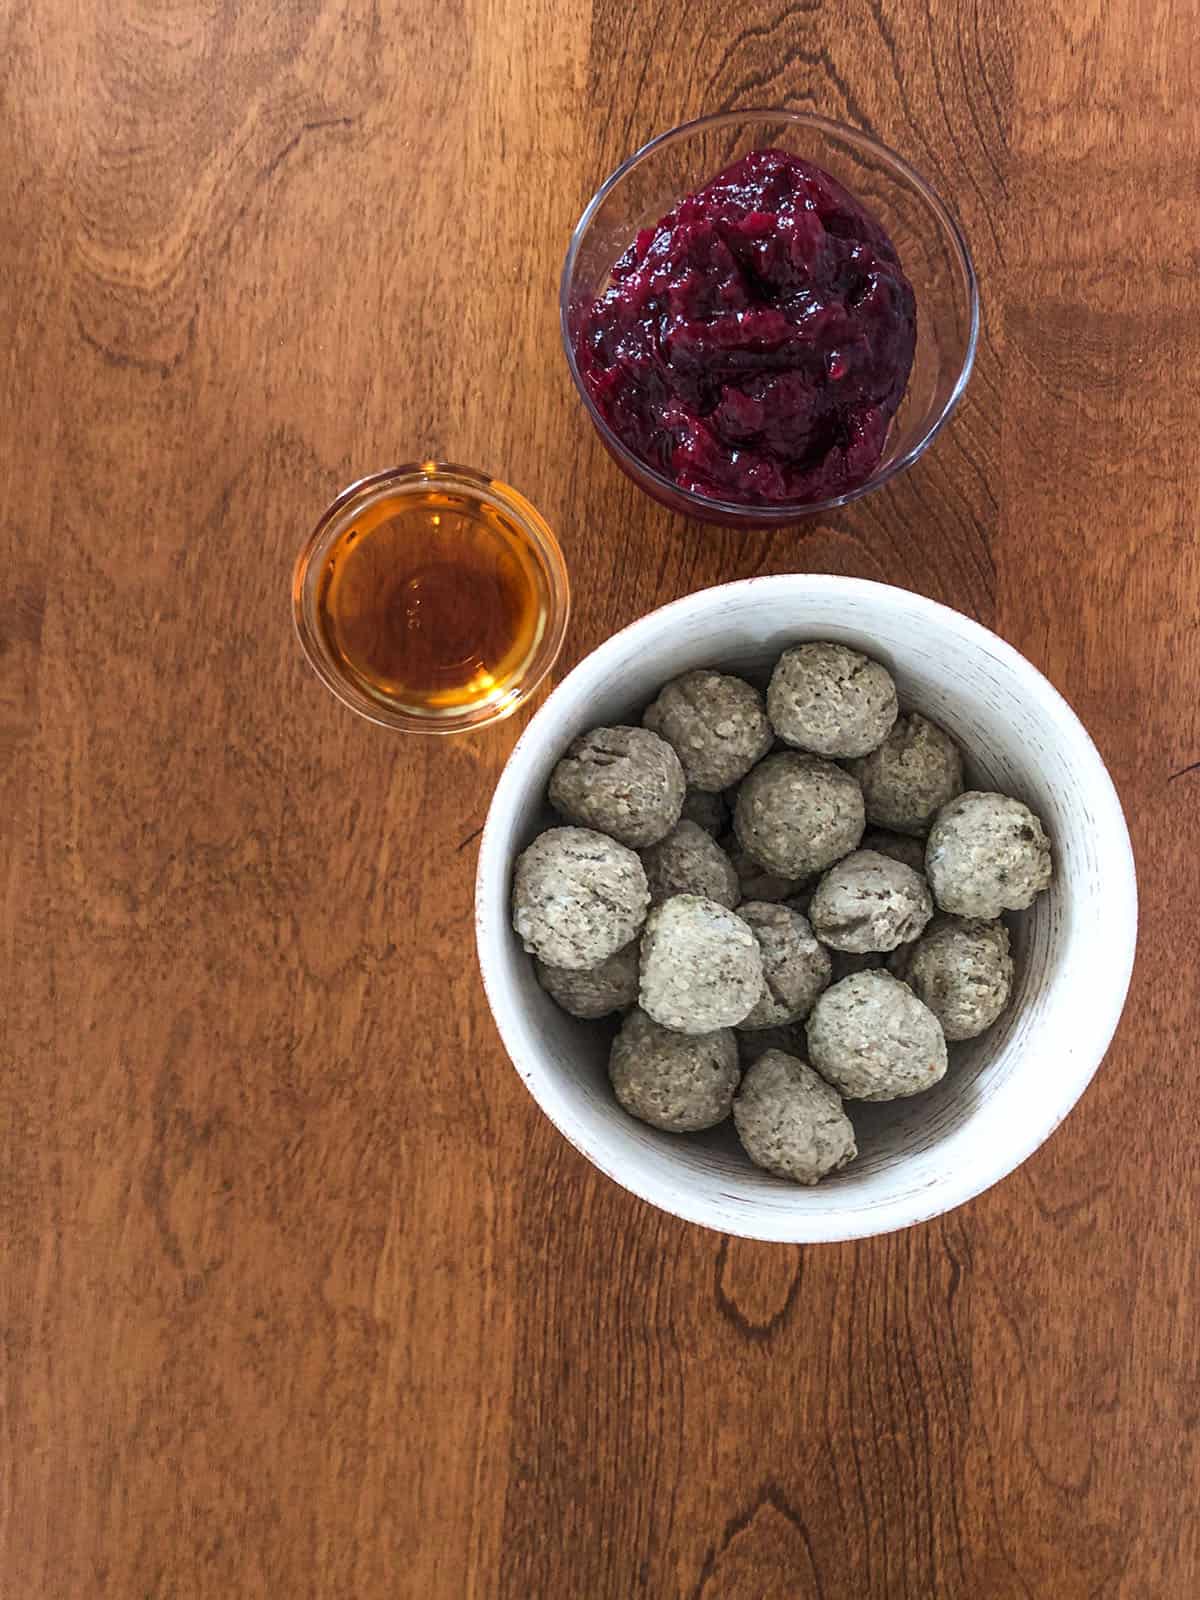 Cocktail meatballs, cranberry sauce, and brandy in individual dishes.